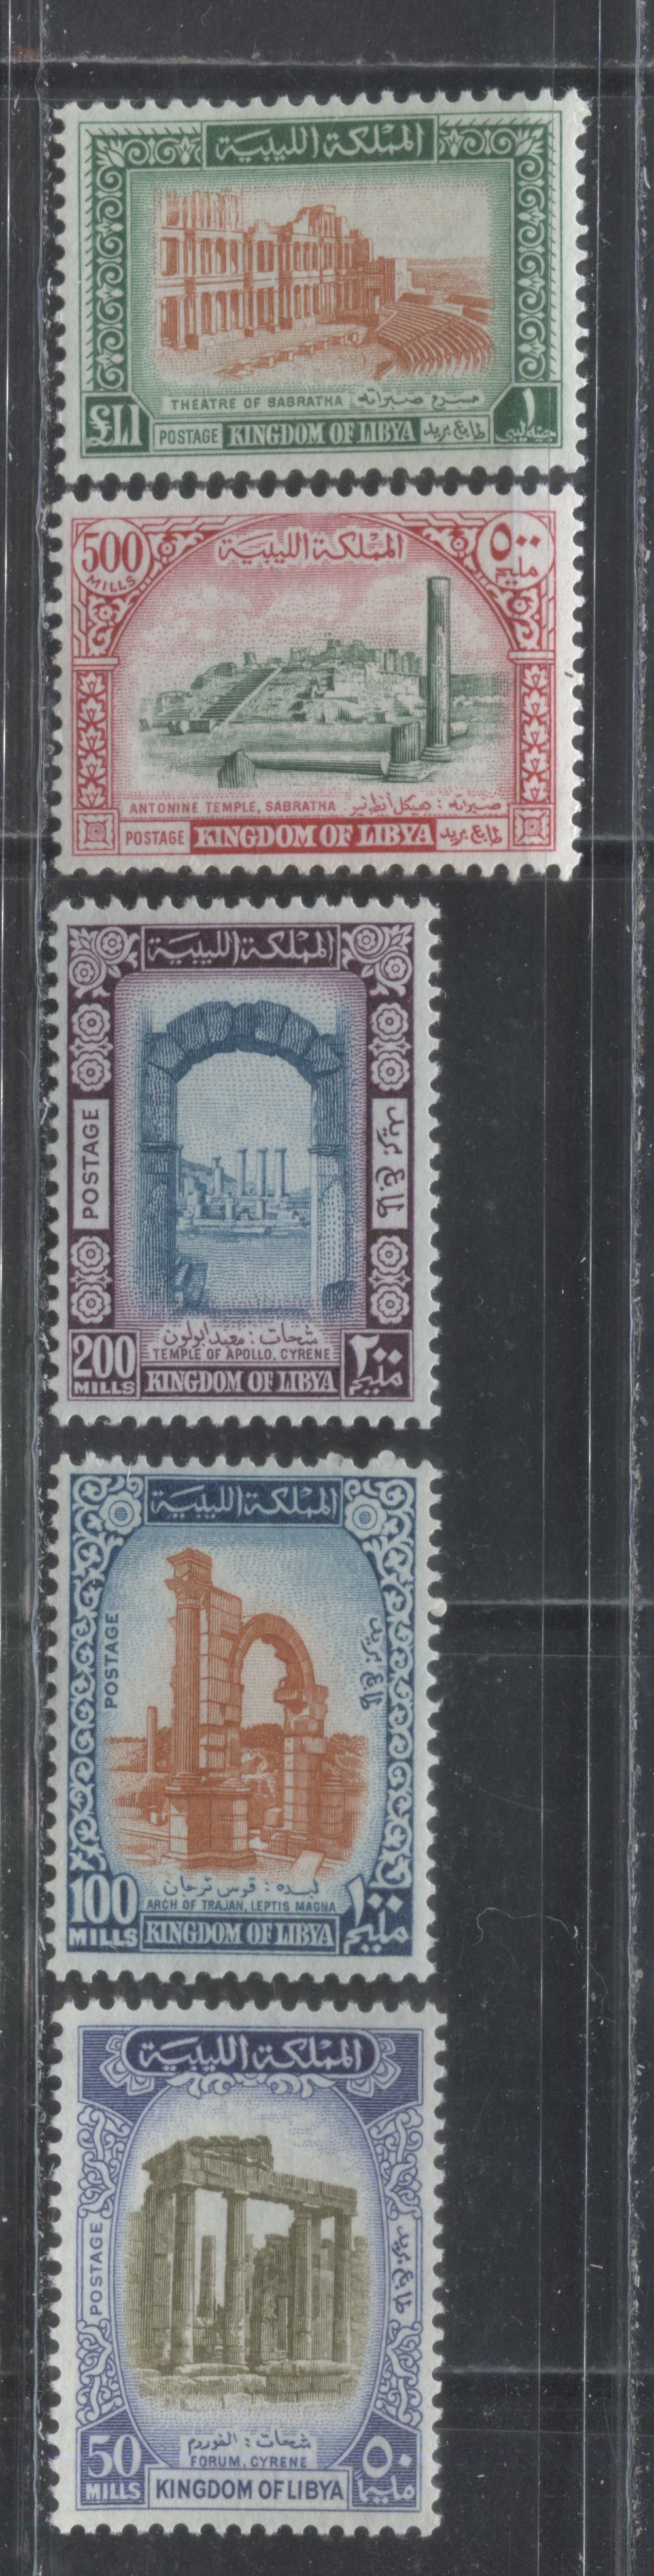 Lot 120 Libya SC#291-295 1965 High Value Archaeological Ruins Definitives, A VFNH Range Of Singles, 2017 Scott Cat. $12.55 USD, Click on Listing to See ALL Pictures